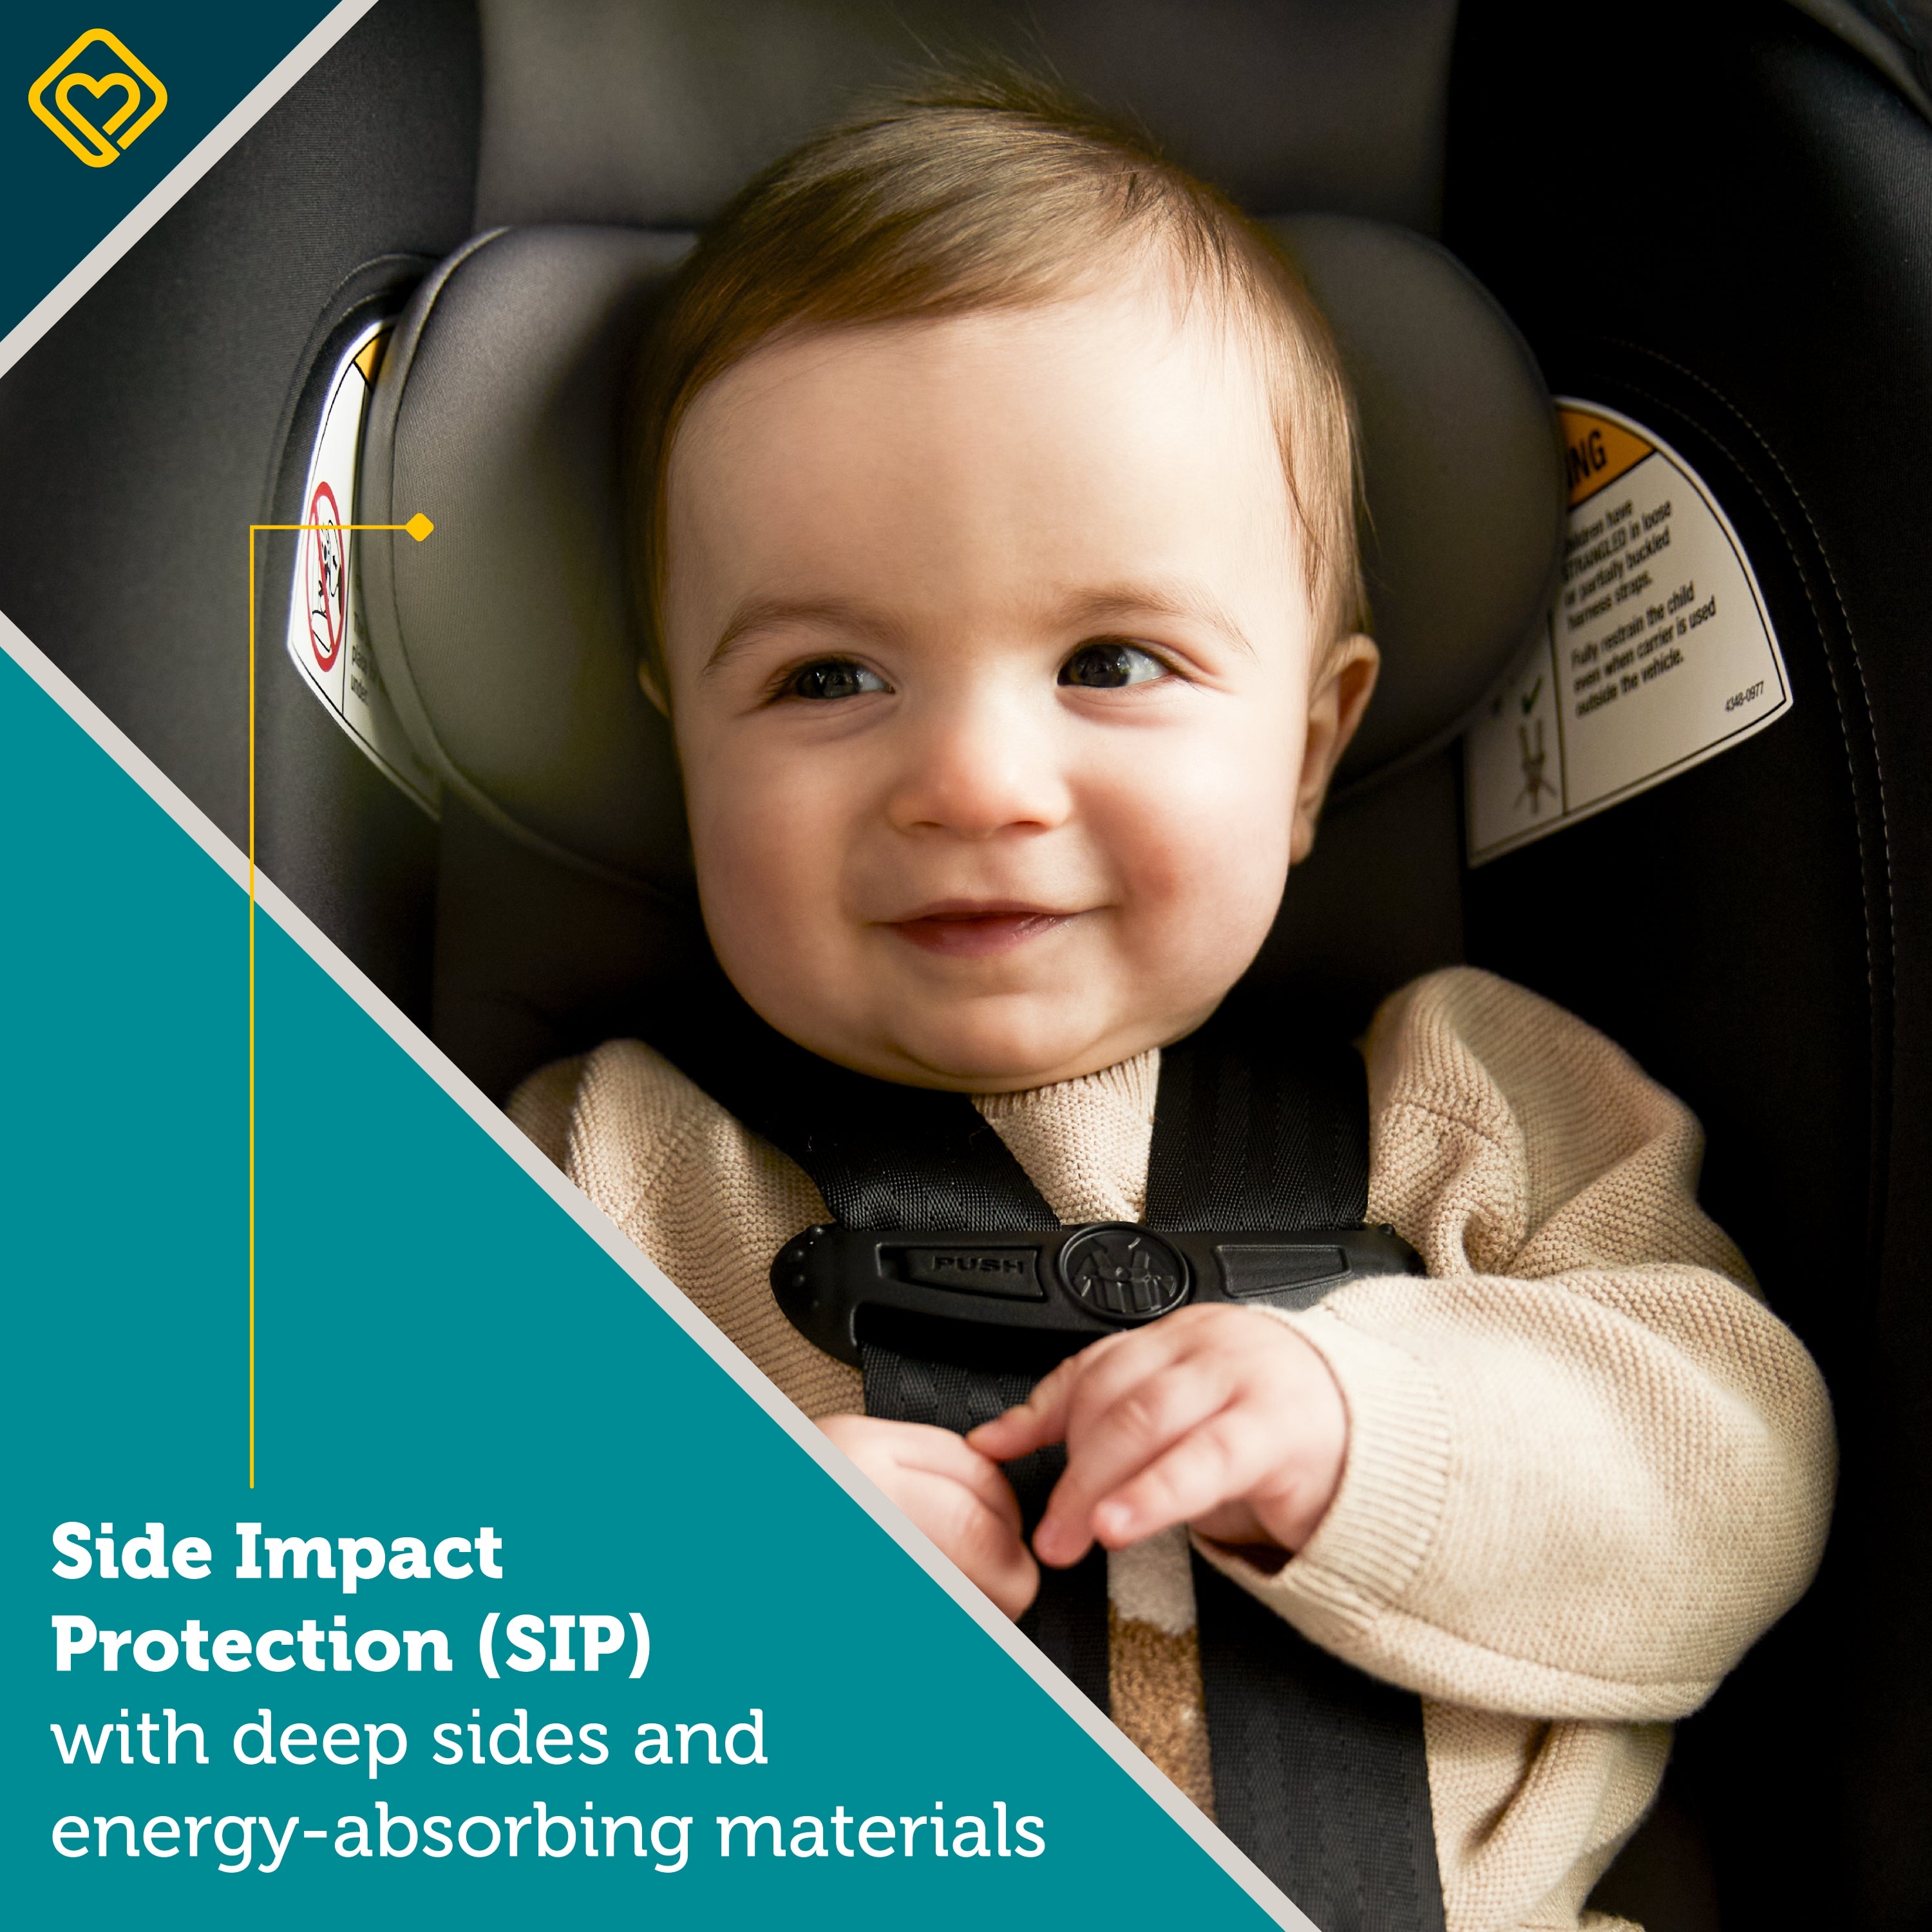 OnBoard LT Infant Car Seat - side impact protection (SIP) with deep sides and energy-absorbing materials